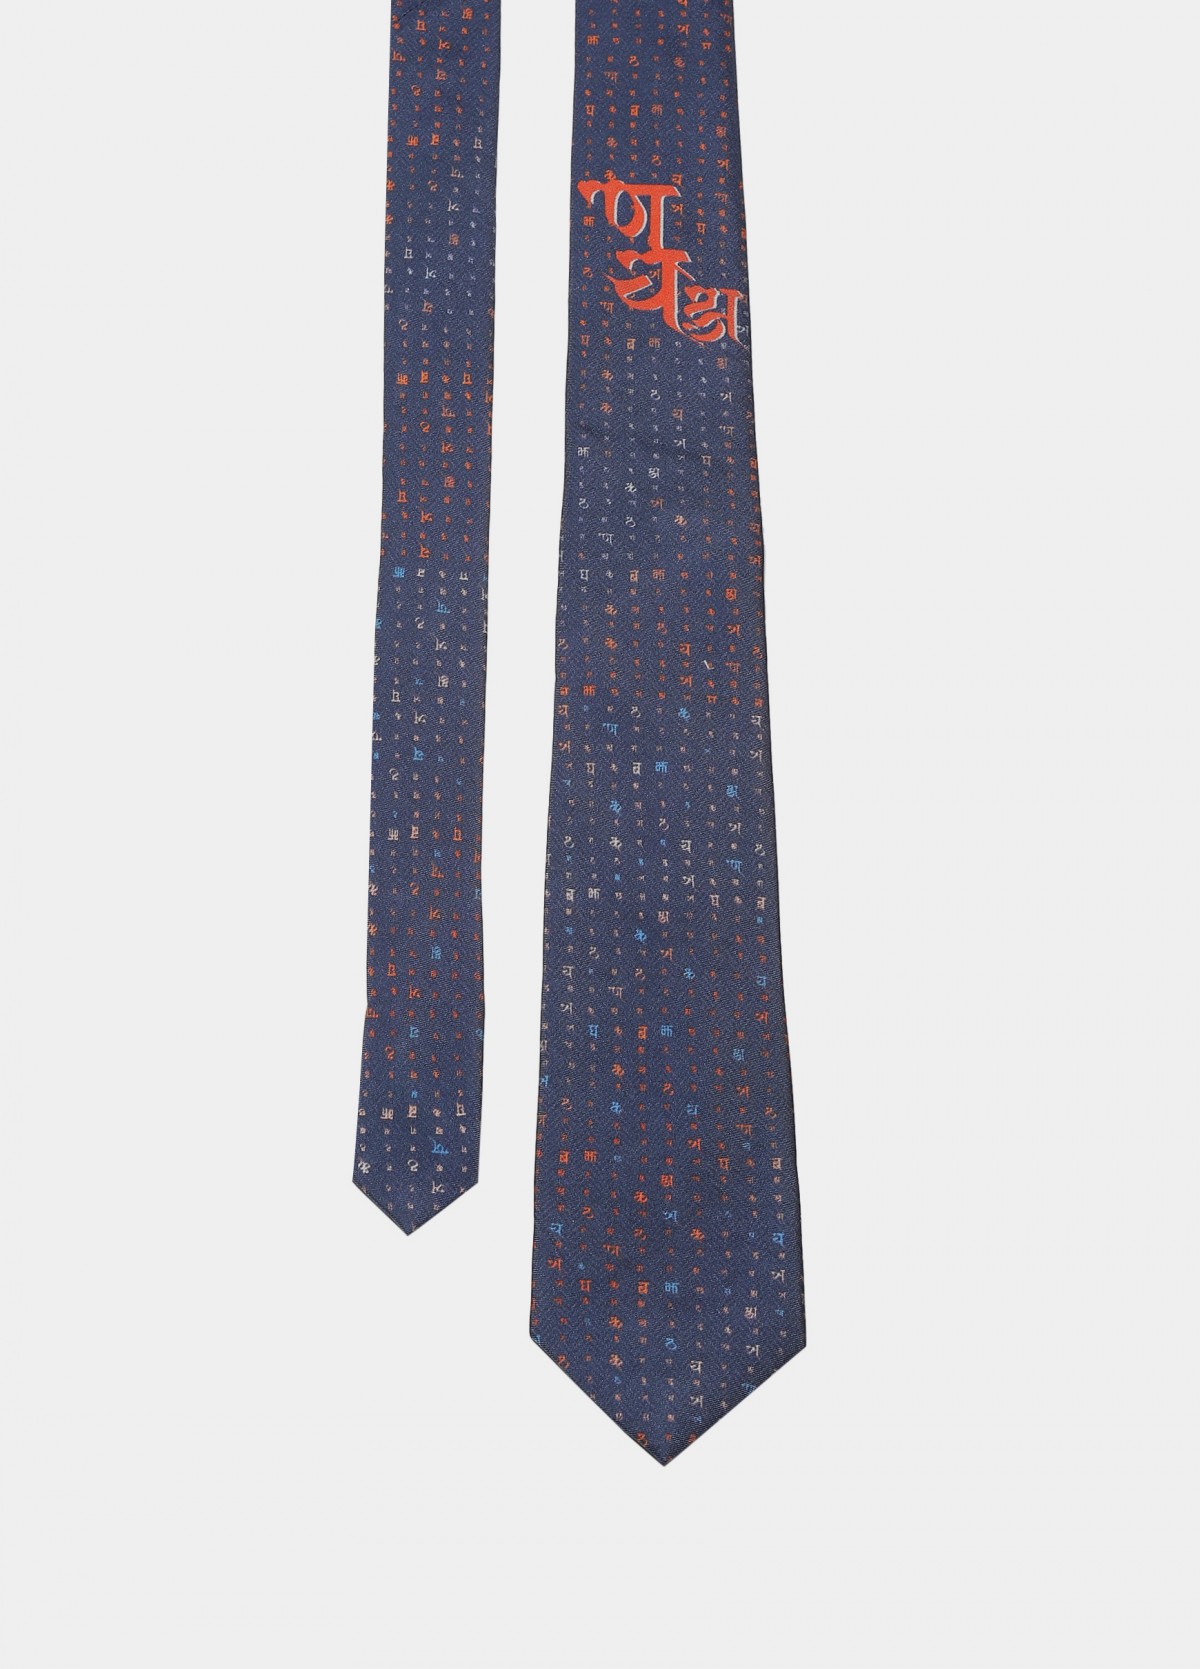 The To Earth Tie